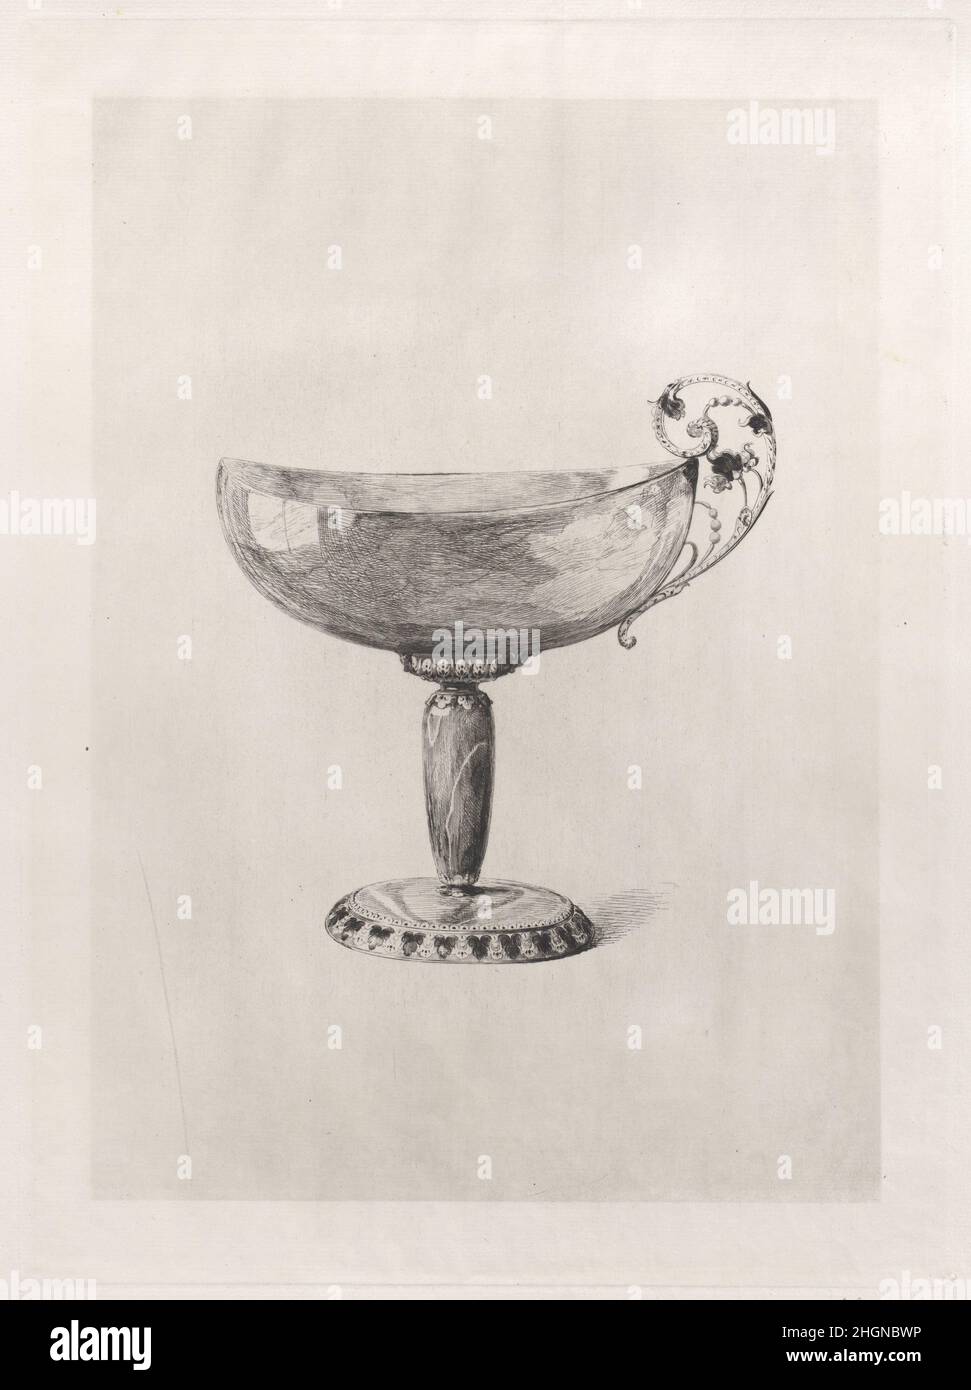 Oriental Cup Made from Agate 1868 Jules-Ferdinand Jacquemart. Oriental Cup Made from Agate. Gems and Jewels of the Crown. Jules-Ferdinand Jacquemart (French, Paris 1837–1880 Paris). 1868. Etching. Prints Stock Photo